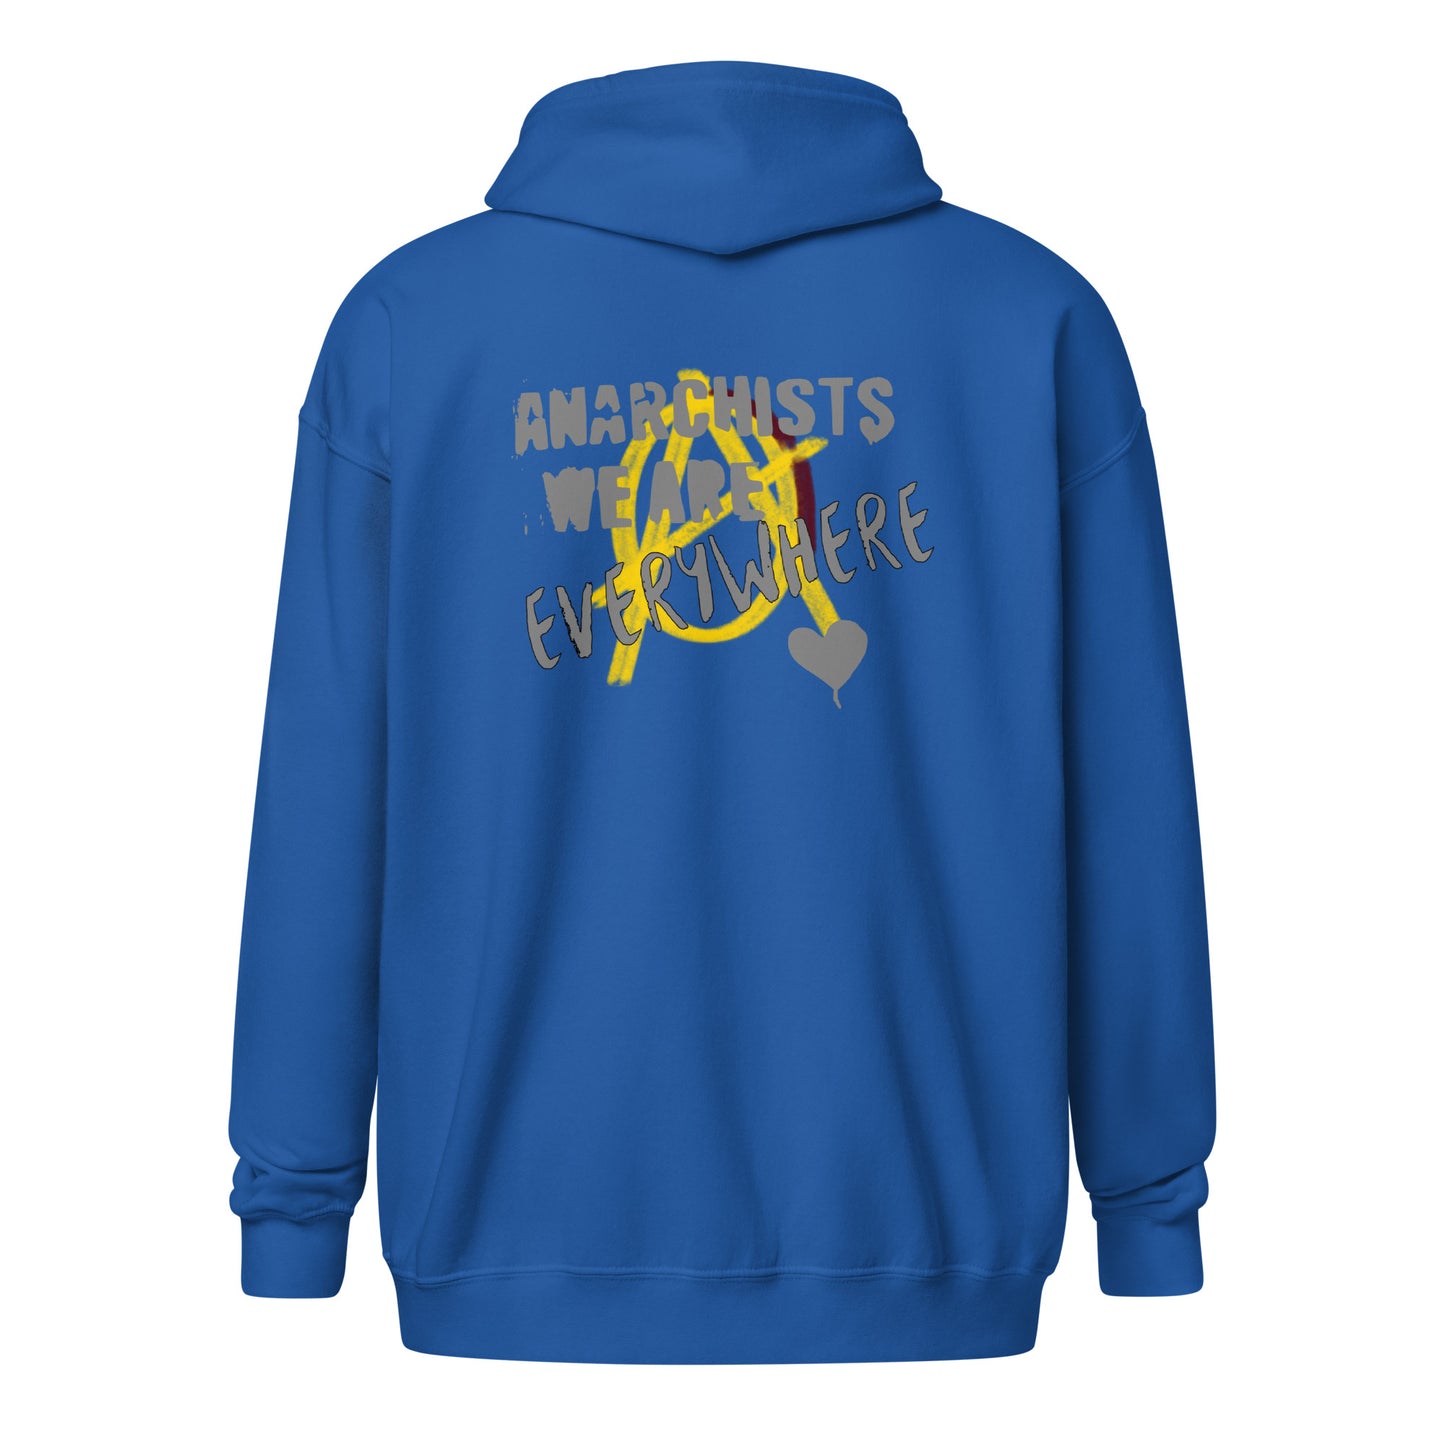 Anarchy Wear "We Are Every Where" Heavy Blend Zip Hoodie